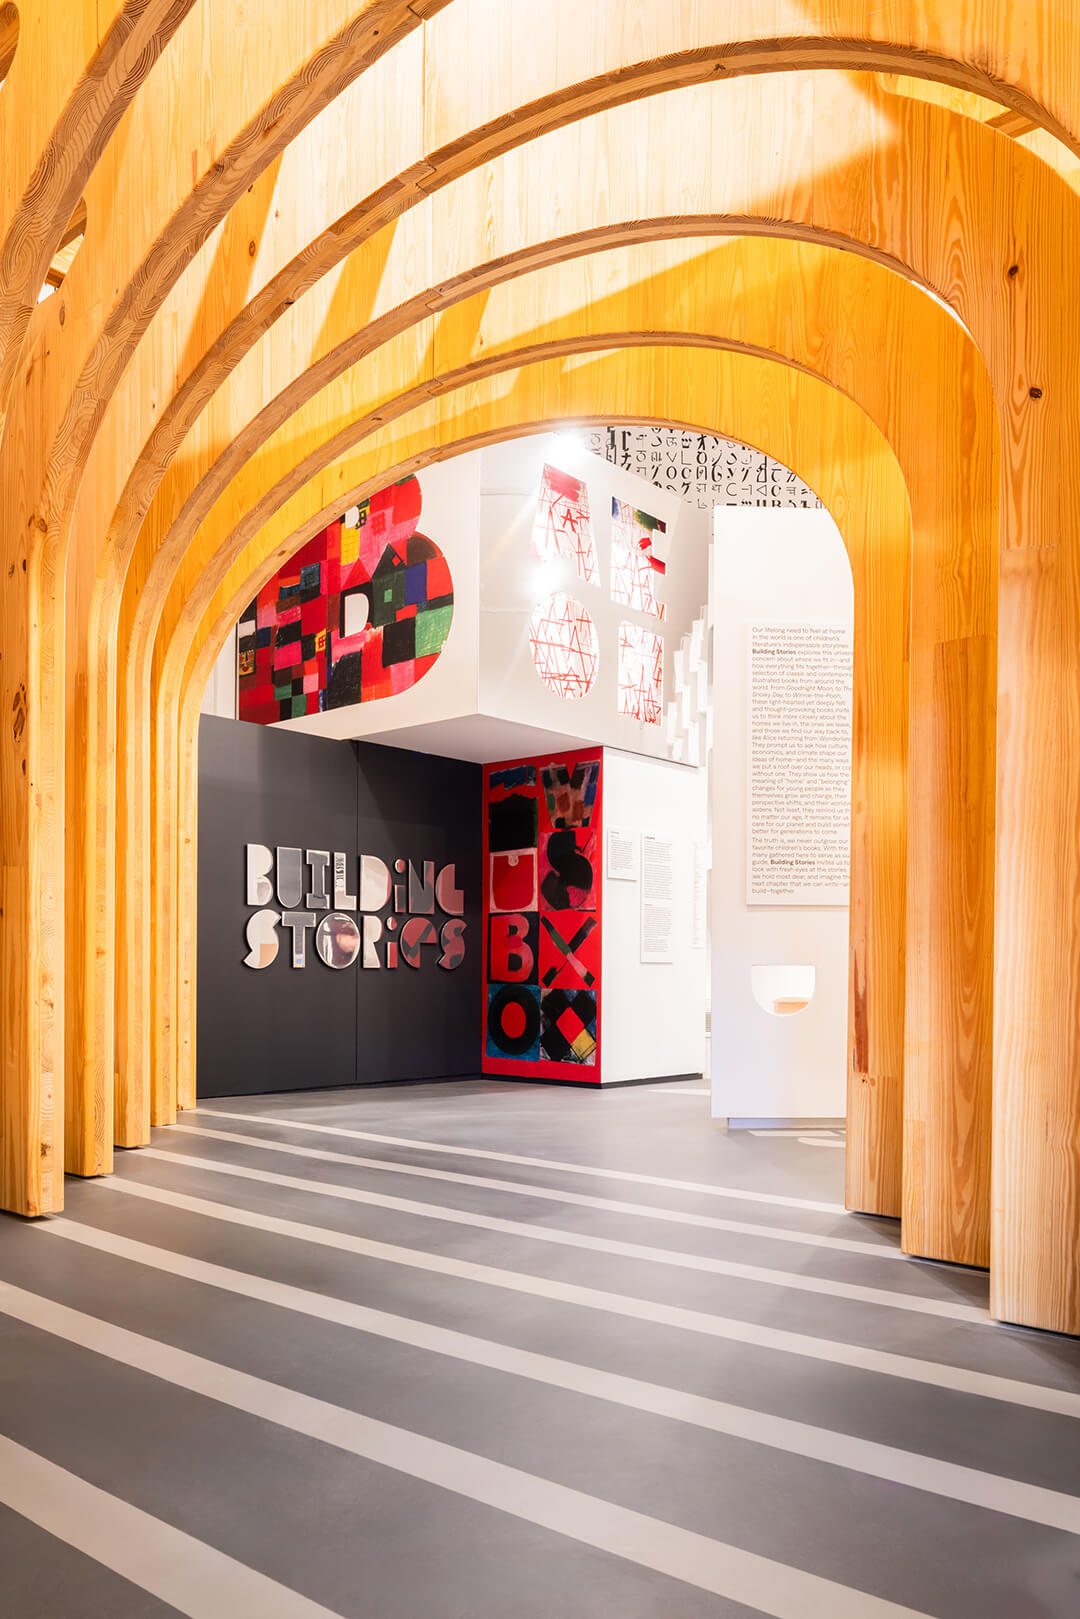 Curving ribs and timber arches: Explore the imaginative landscape of Building Stories | Building Stories| National Building Museum | STIRworld